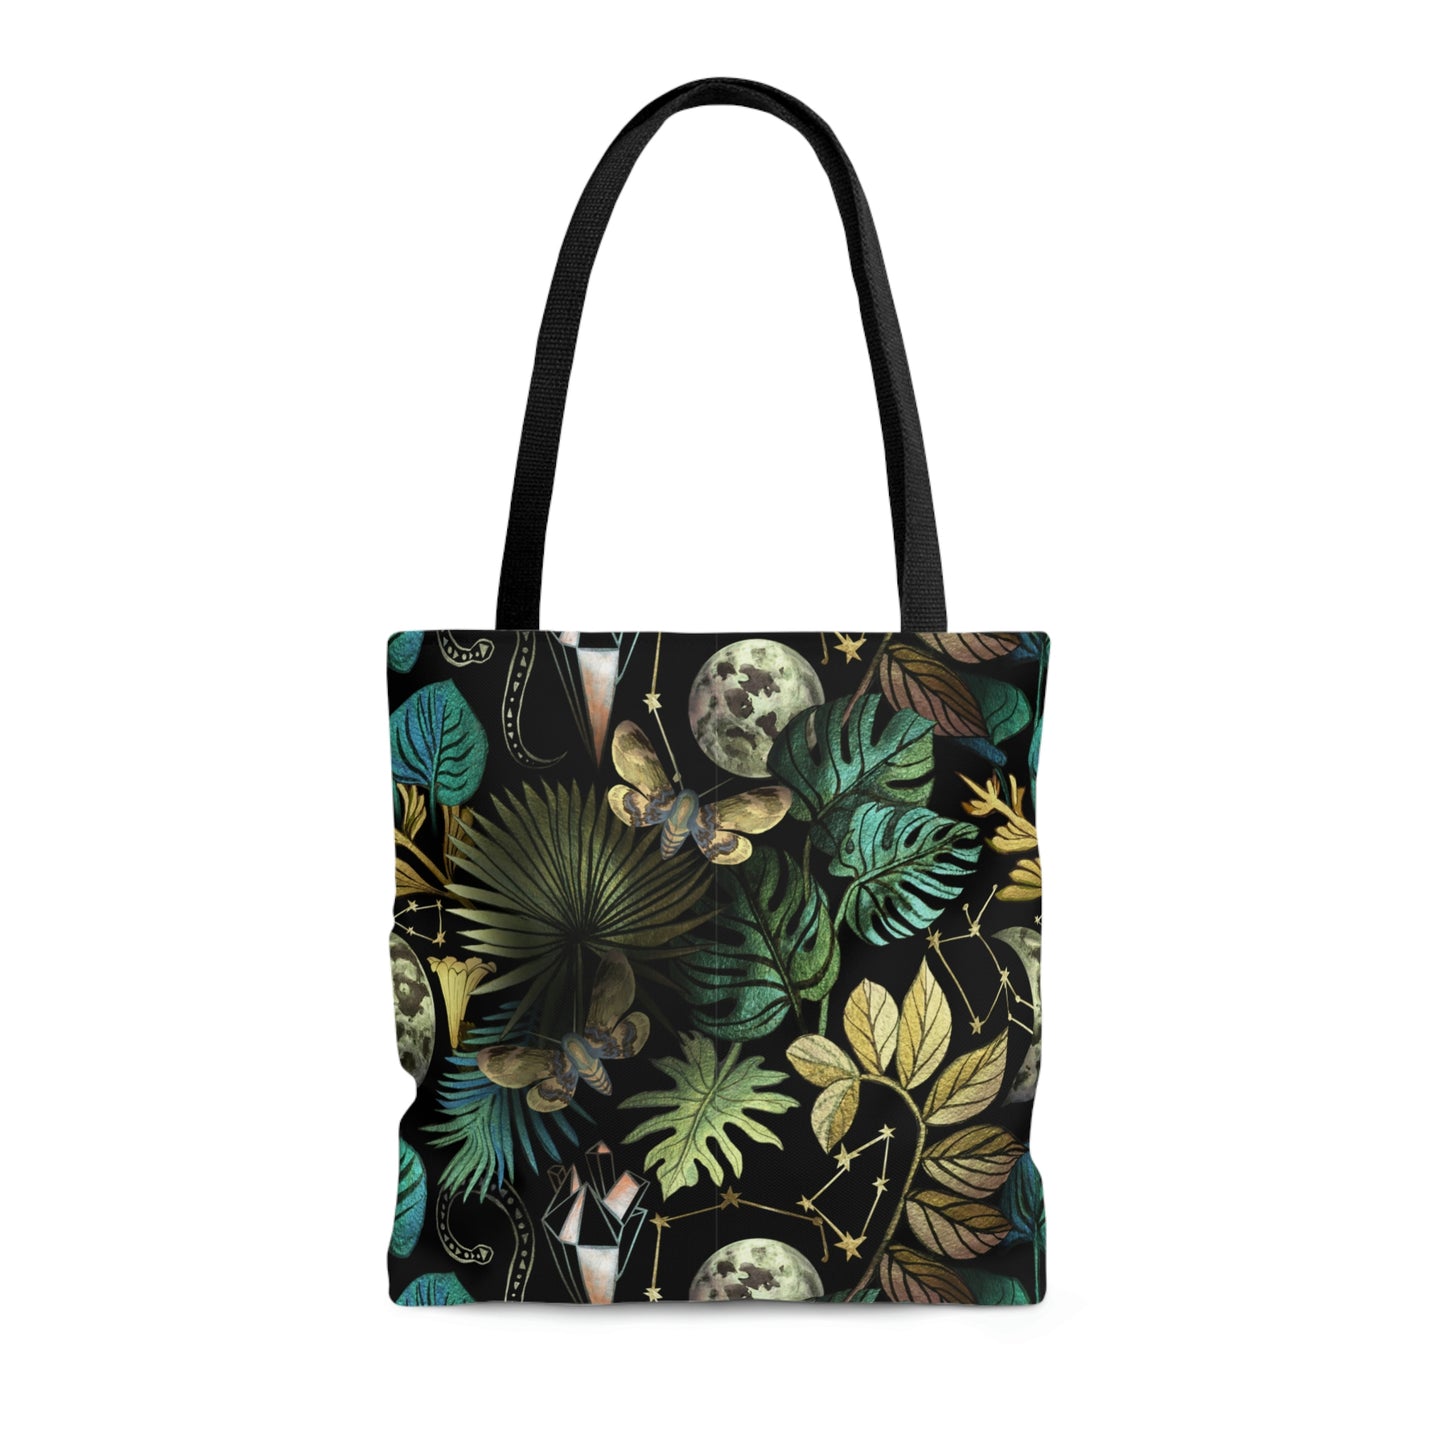 Mystical Tote Bag. Bag with monstera leaf, olants leaves, moon and stars.